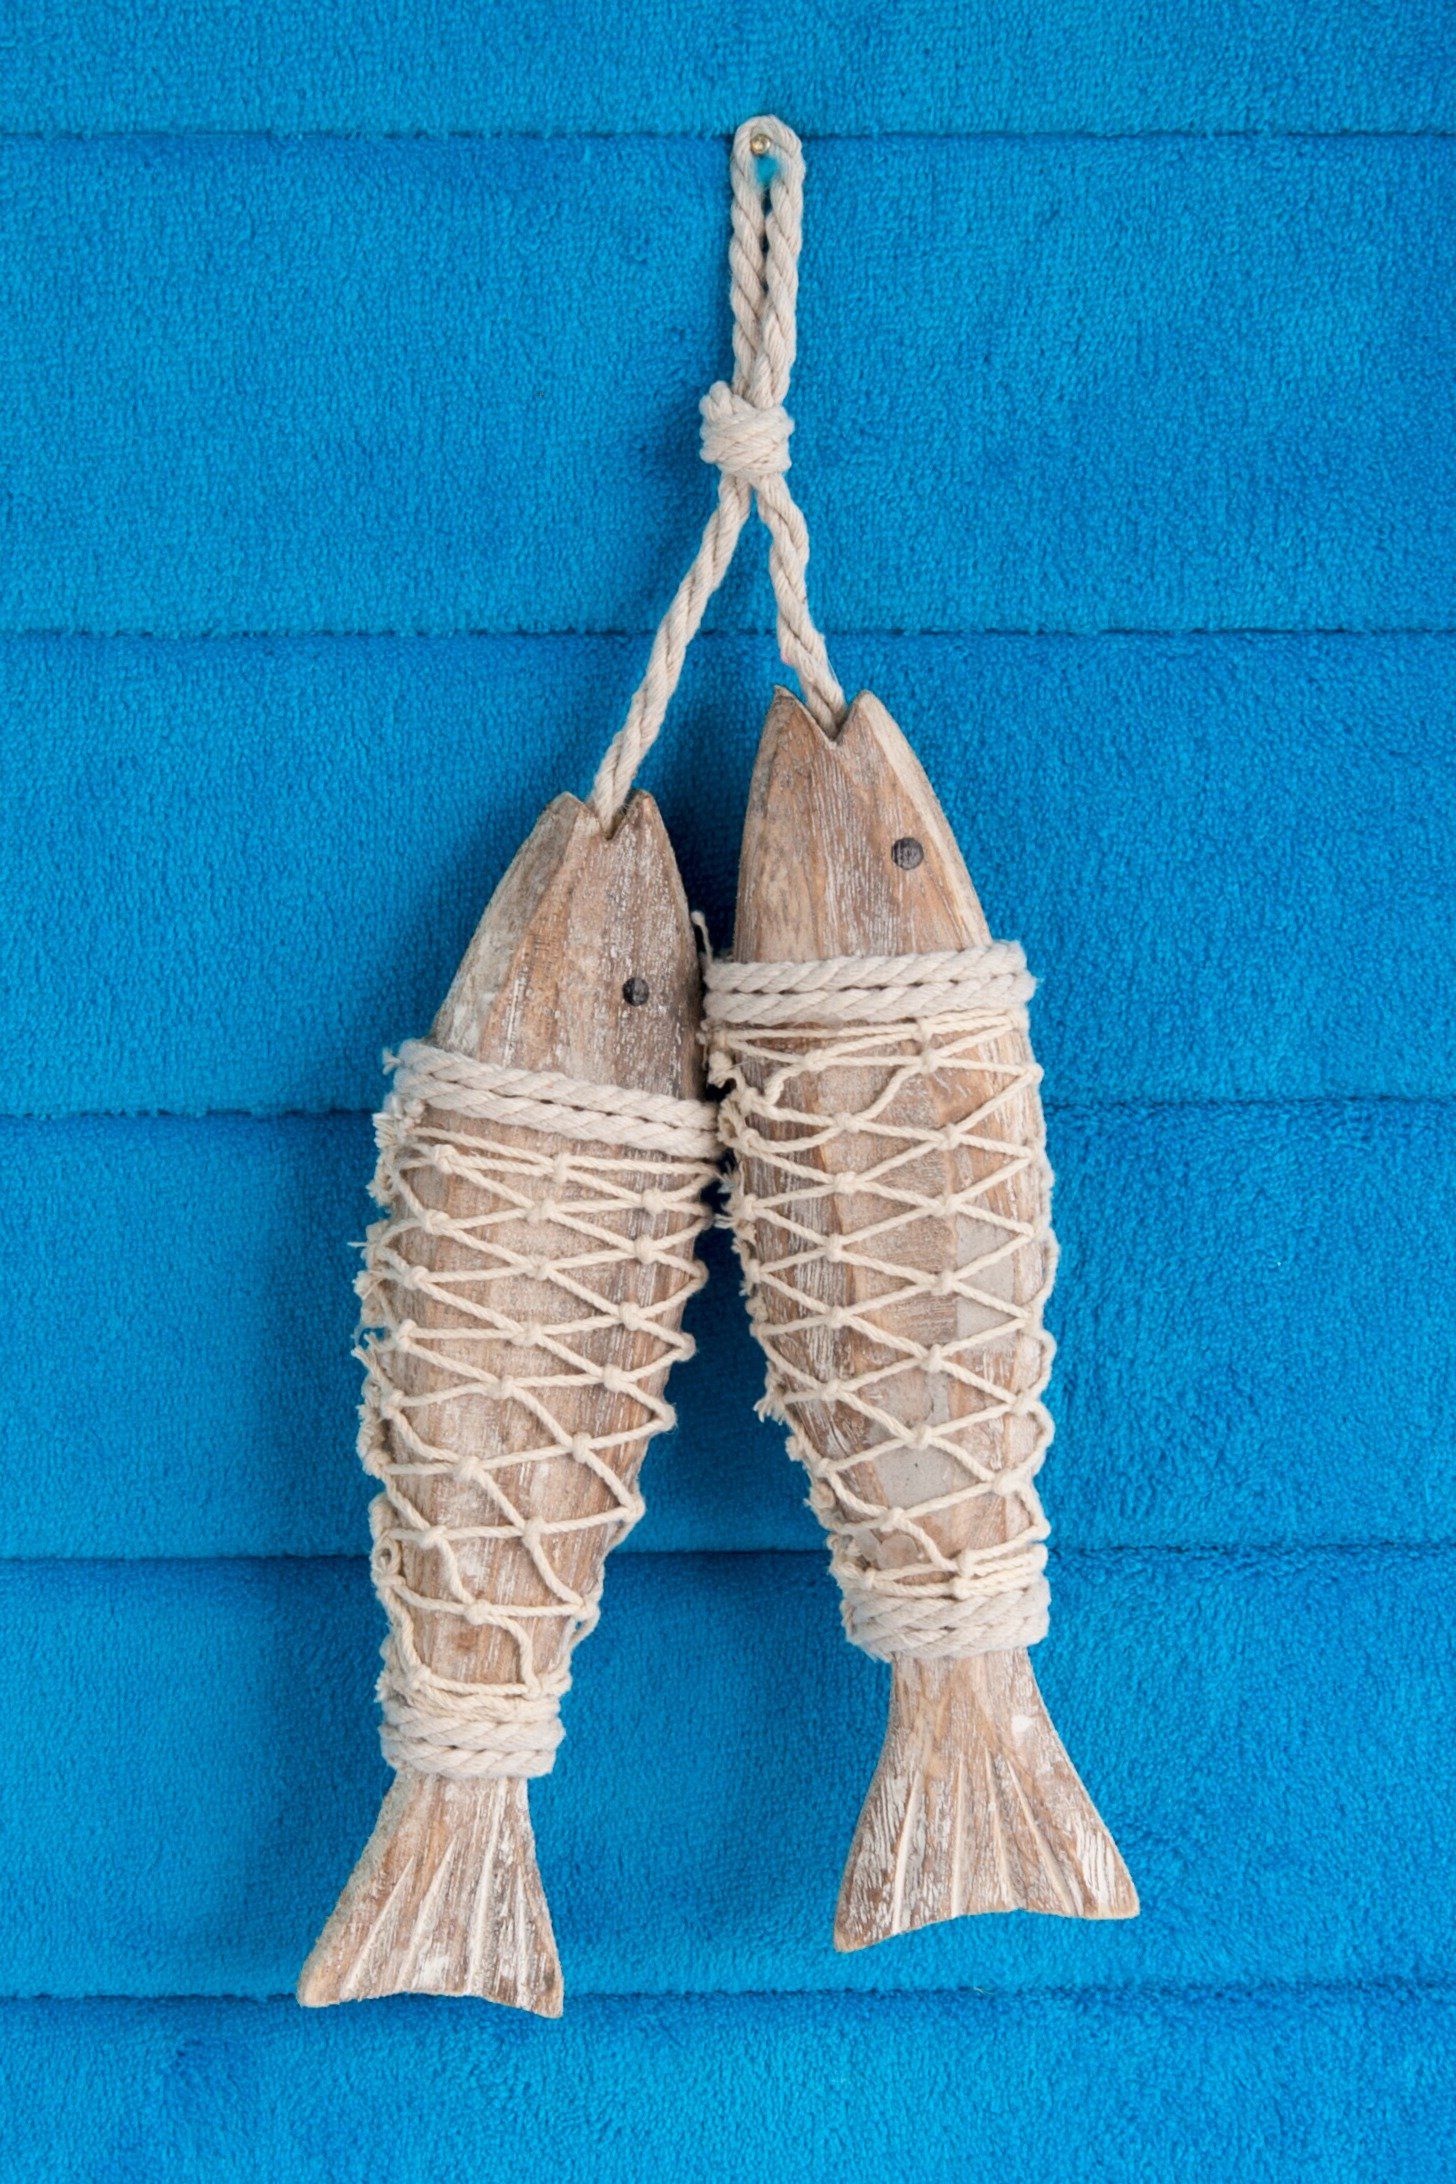 Handcrafted Hanging Fish In Net Wall Décor Pertaining To Current Handcrafted Hanging Fish In Net Wall Décor (View 1 of 20)